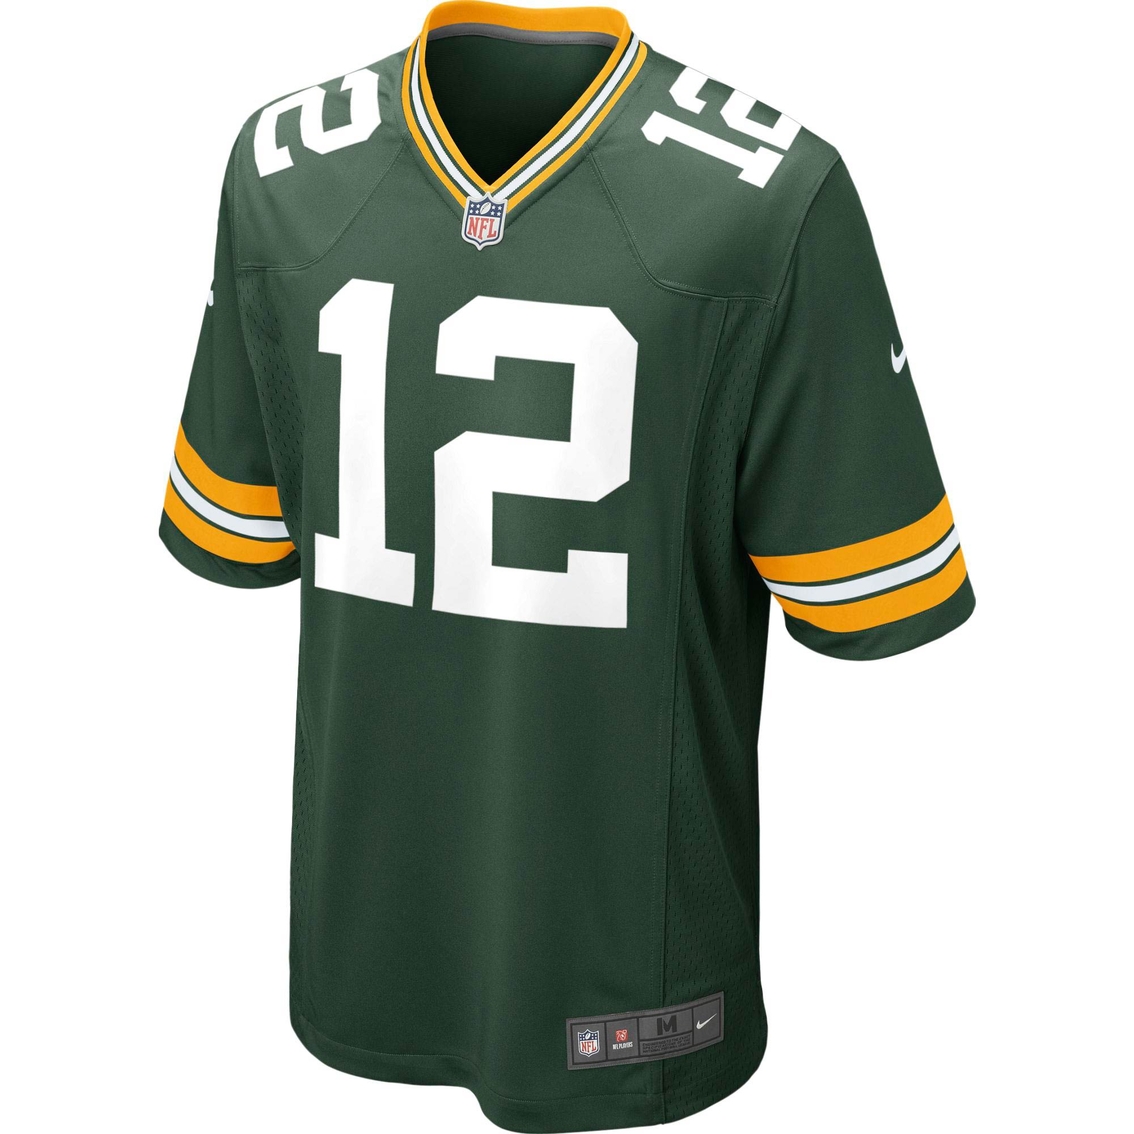 Nike Nfl Green Bay Packers Rodgers Game Jersey   Nfl   Sports 